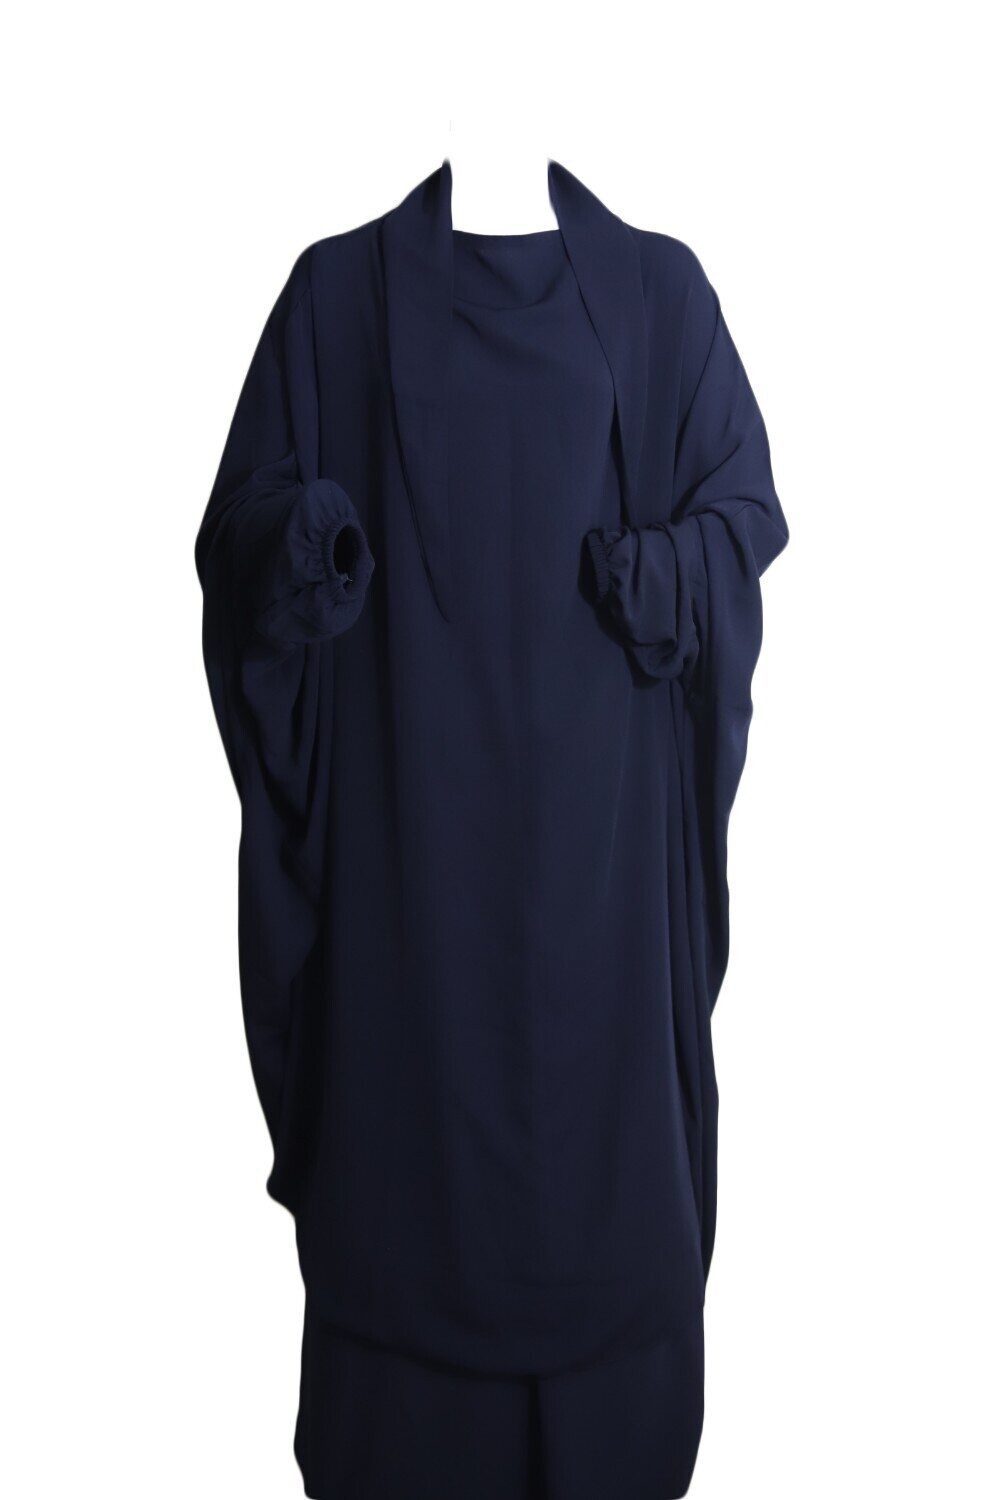 Buy jilbab 2 piece in many different colors. Blue, purple, black, gray, green and more.